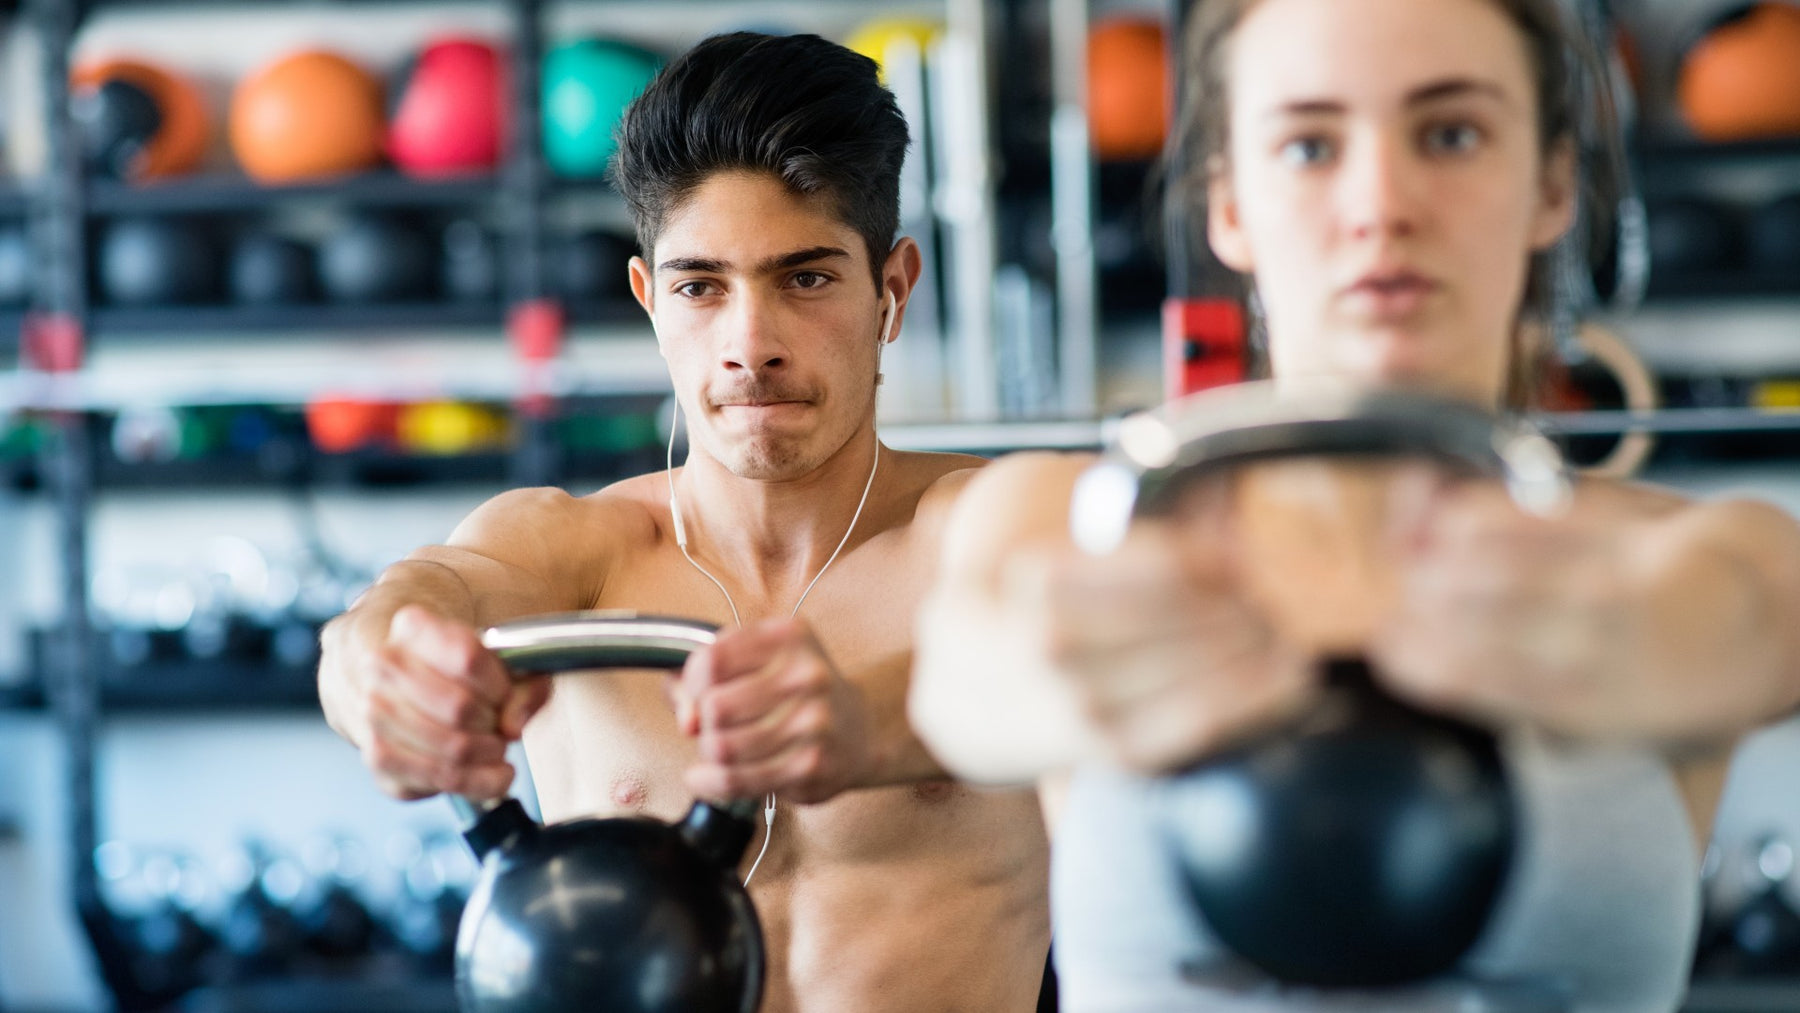 Just Started Working Out? 11 Things to Look Forward to